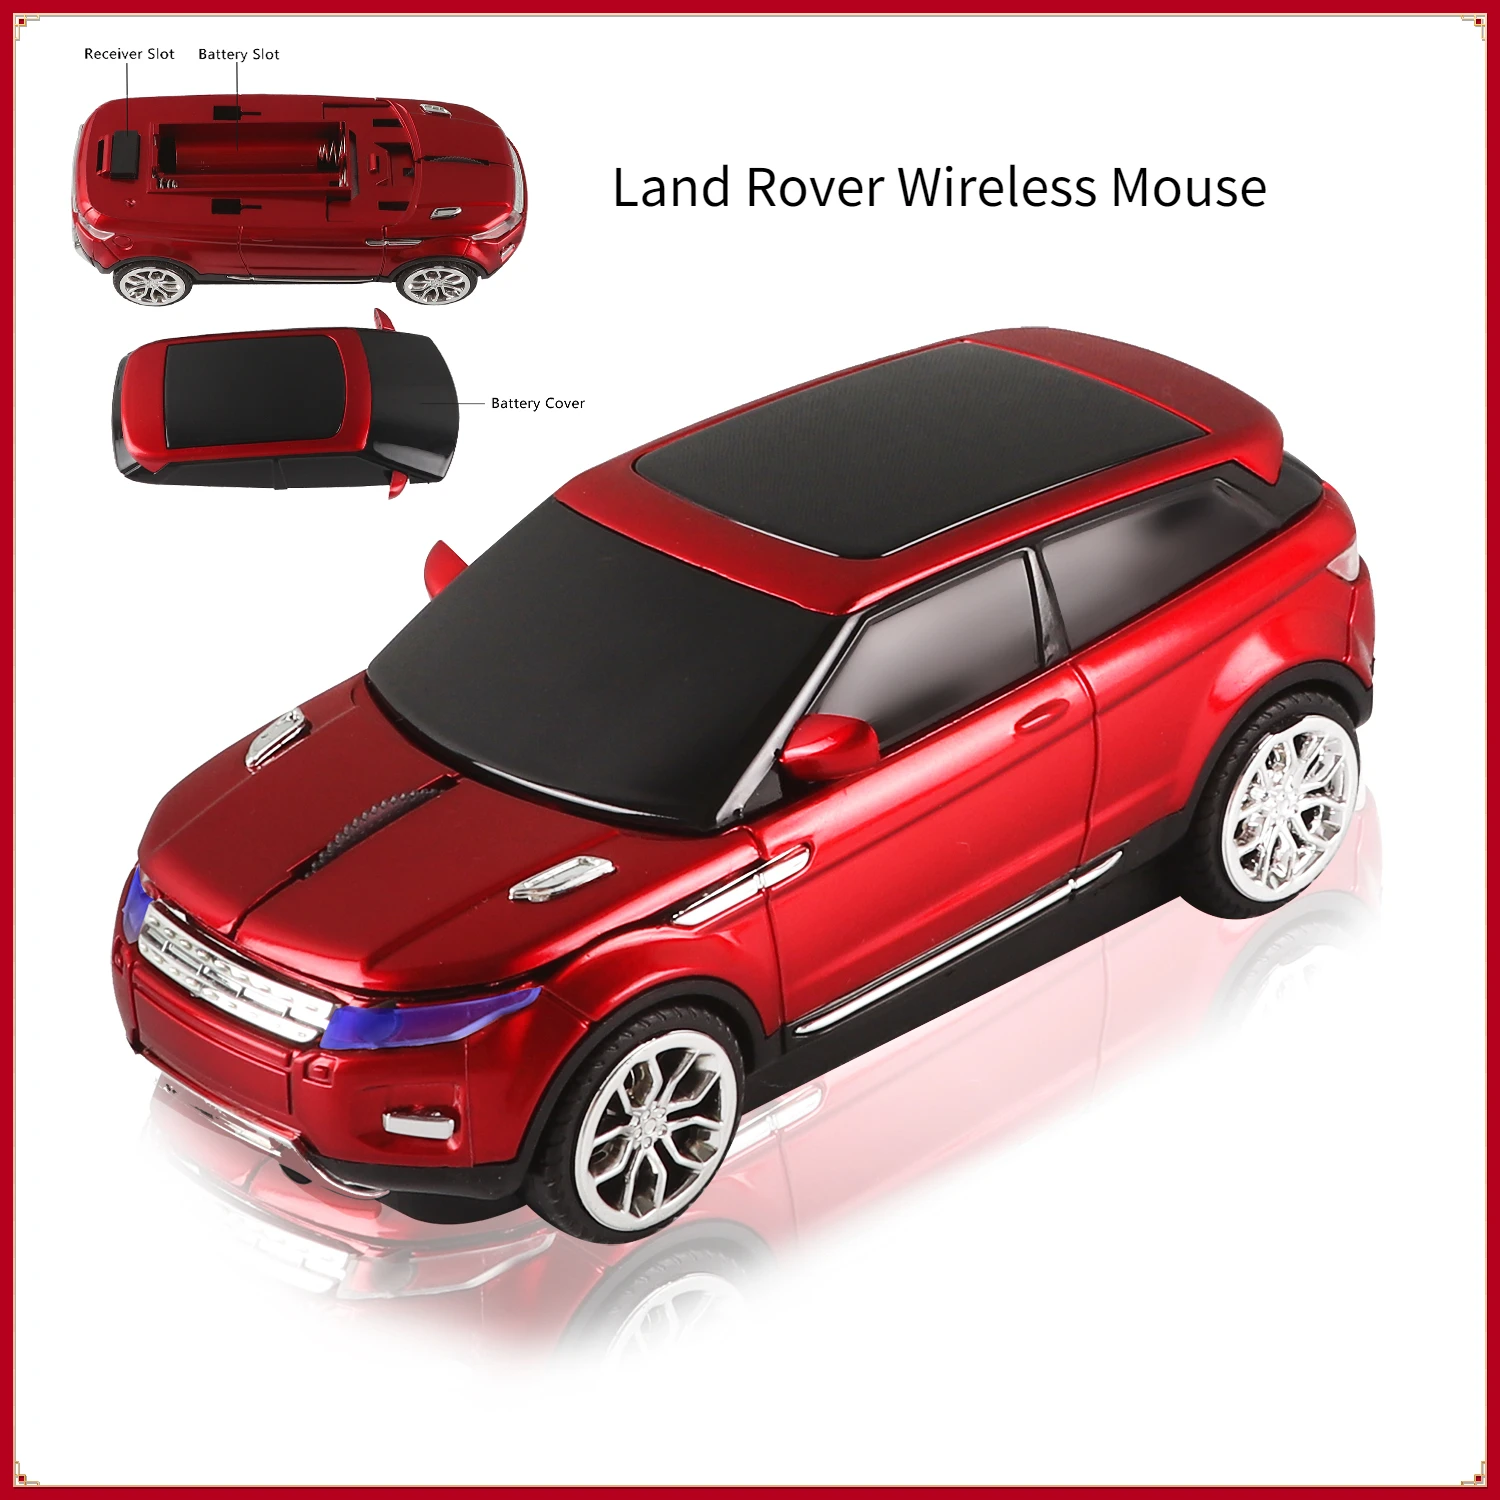 

Land Rover Wireless Mouse 2.4G Optical USB Mouse 3D Mini Office Computer Mice Ergonomic Gaming Mause For Laptop Desktop PC Mac